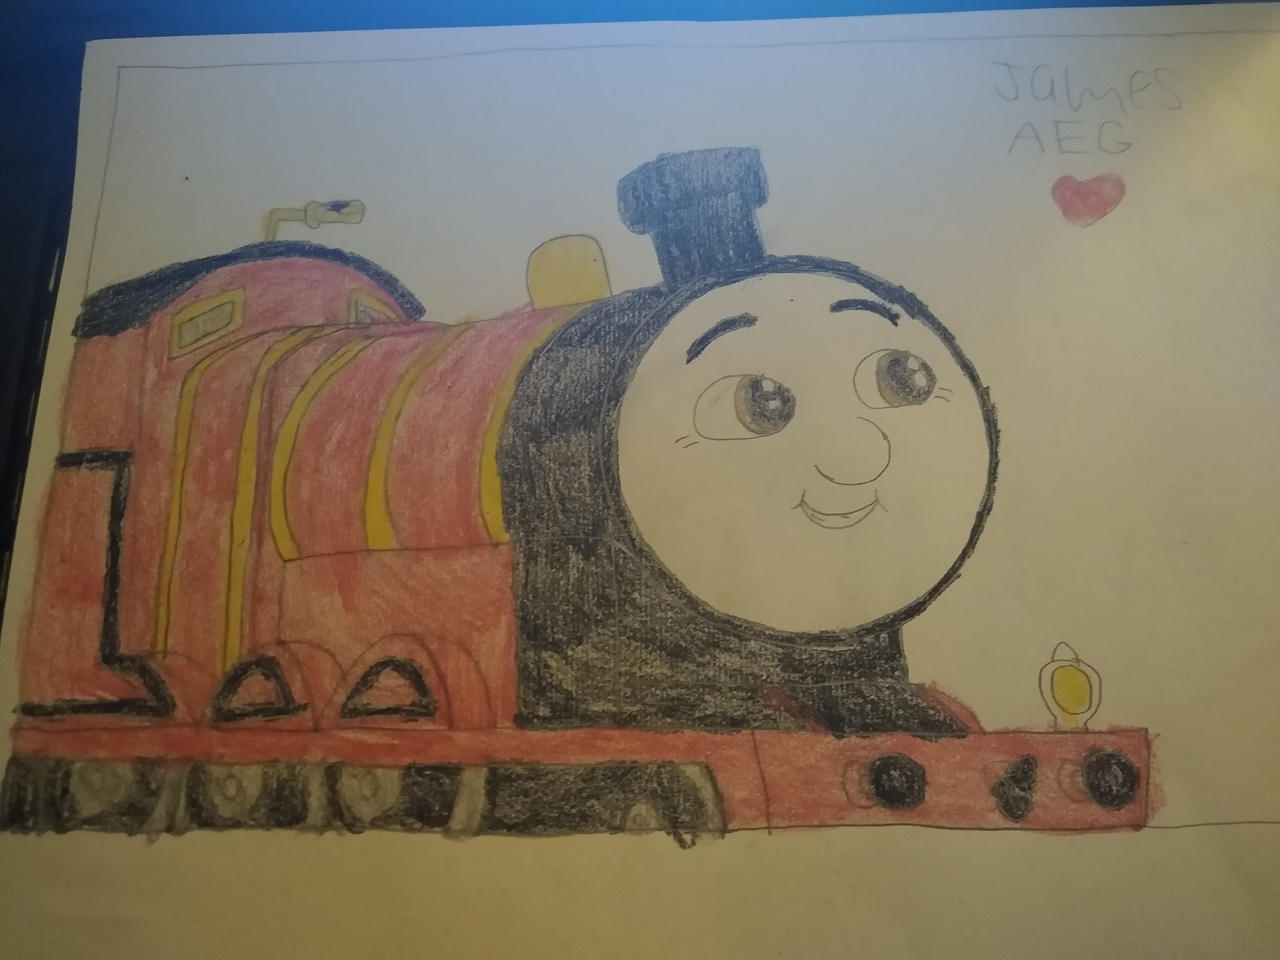 James The Red Engine by NWRFan5701 on DeviantArt